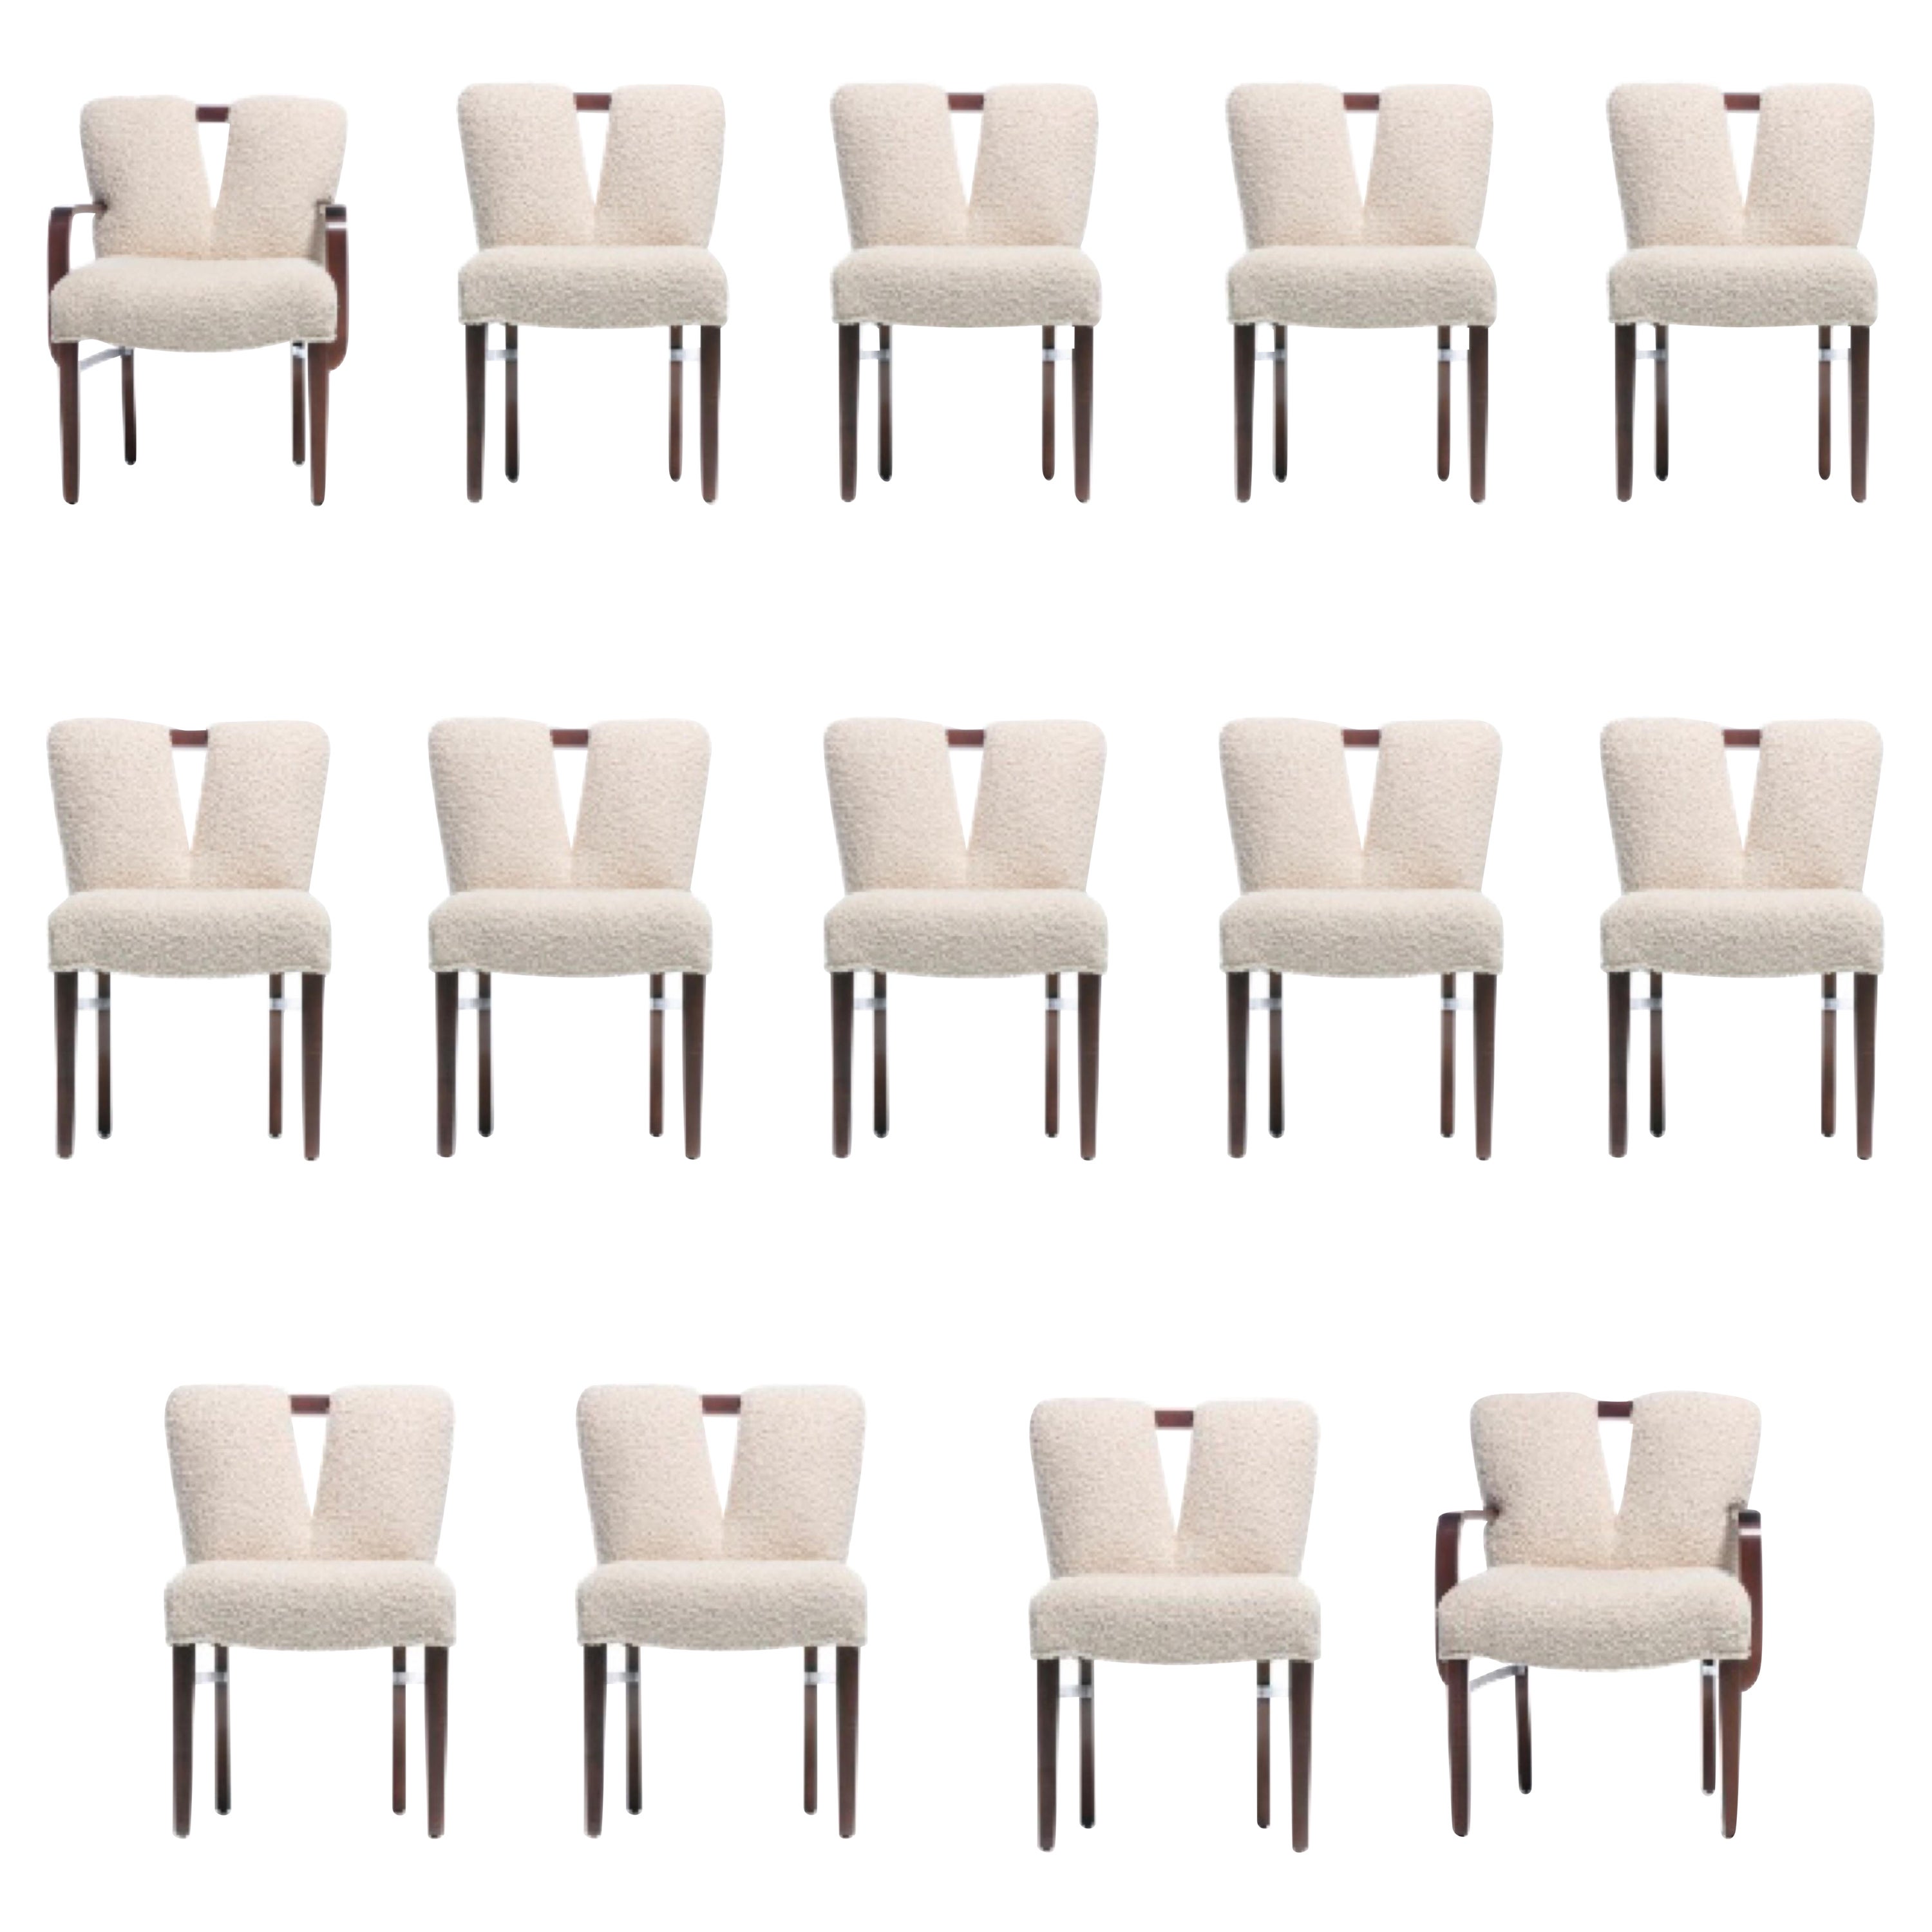 Set of 14 Paul Frankl Corset Back Dining Chairs in Ivory White Bouclé, c. 1950s